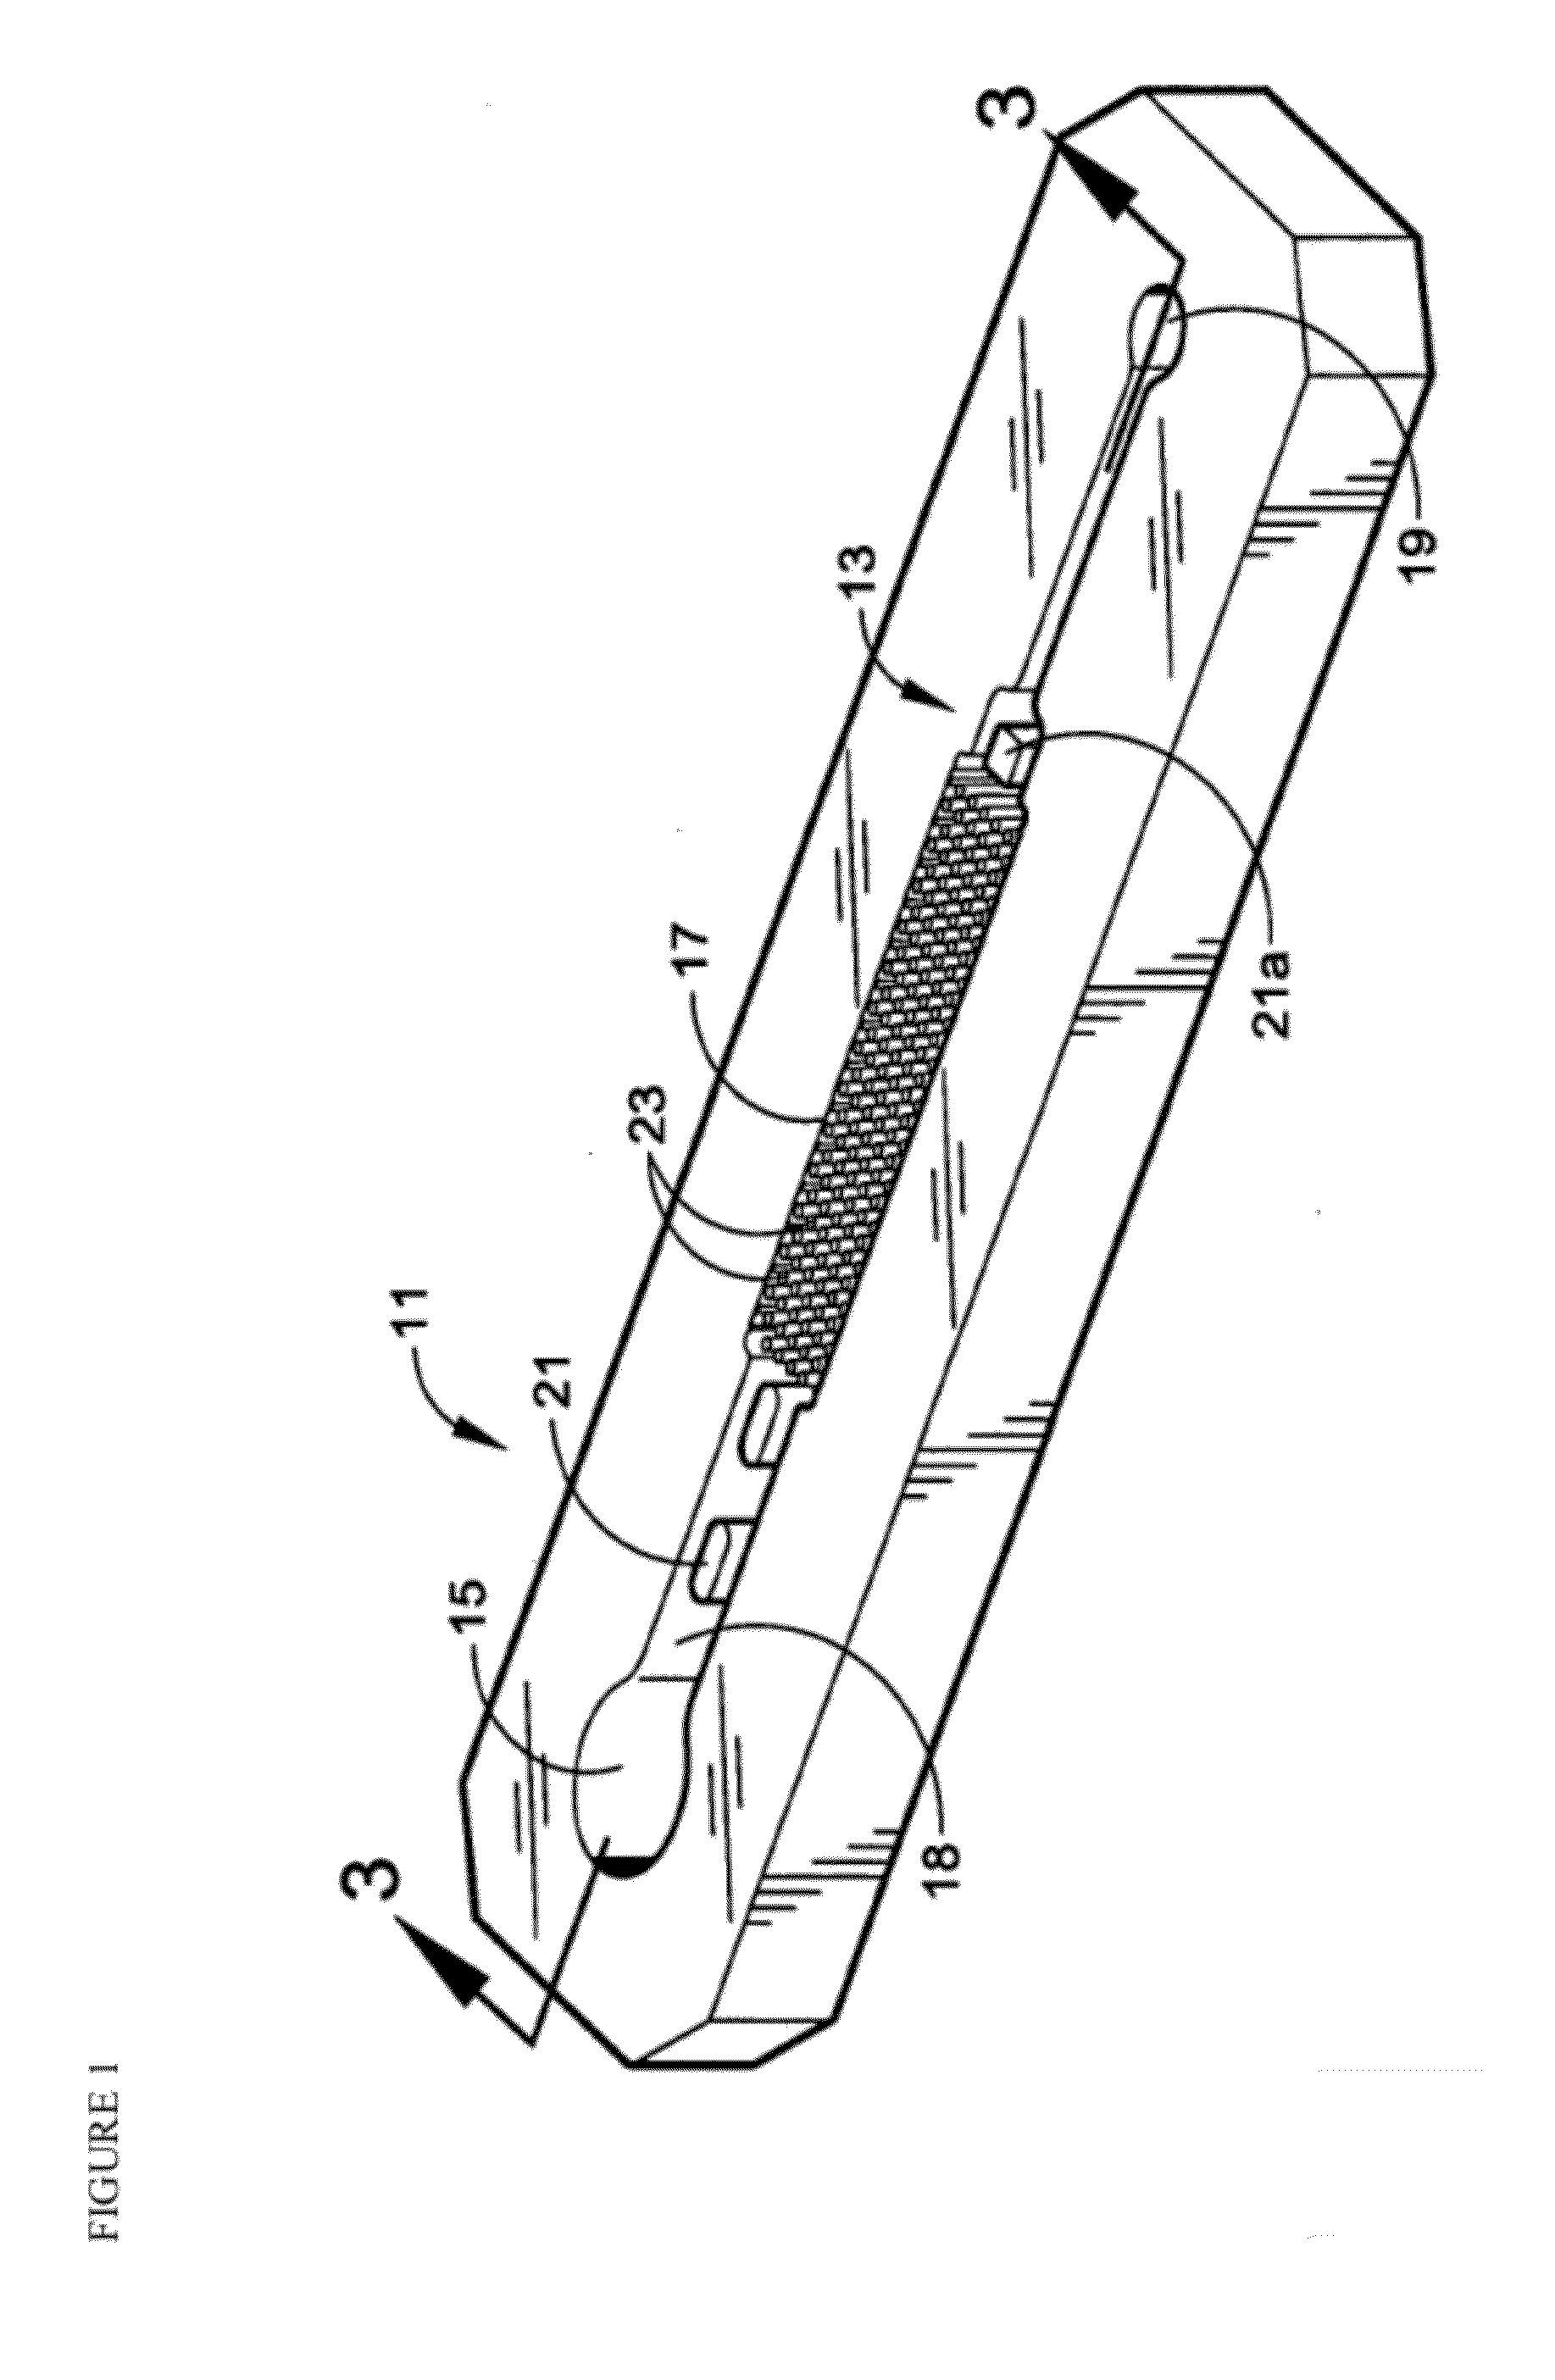 Devices and methods of cell capture and analysis